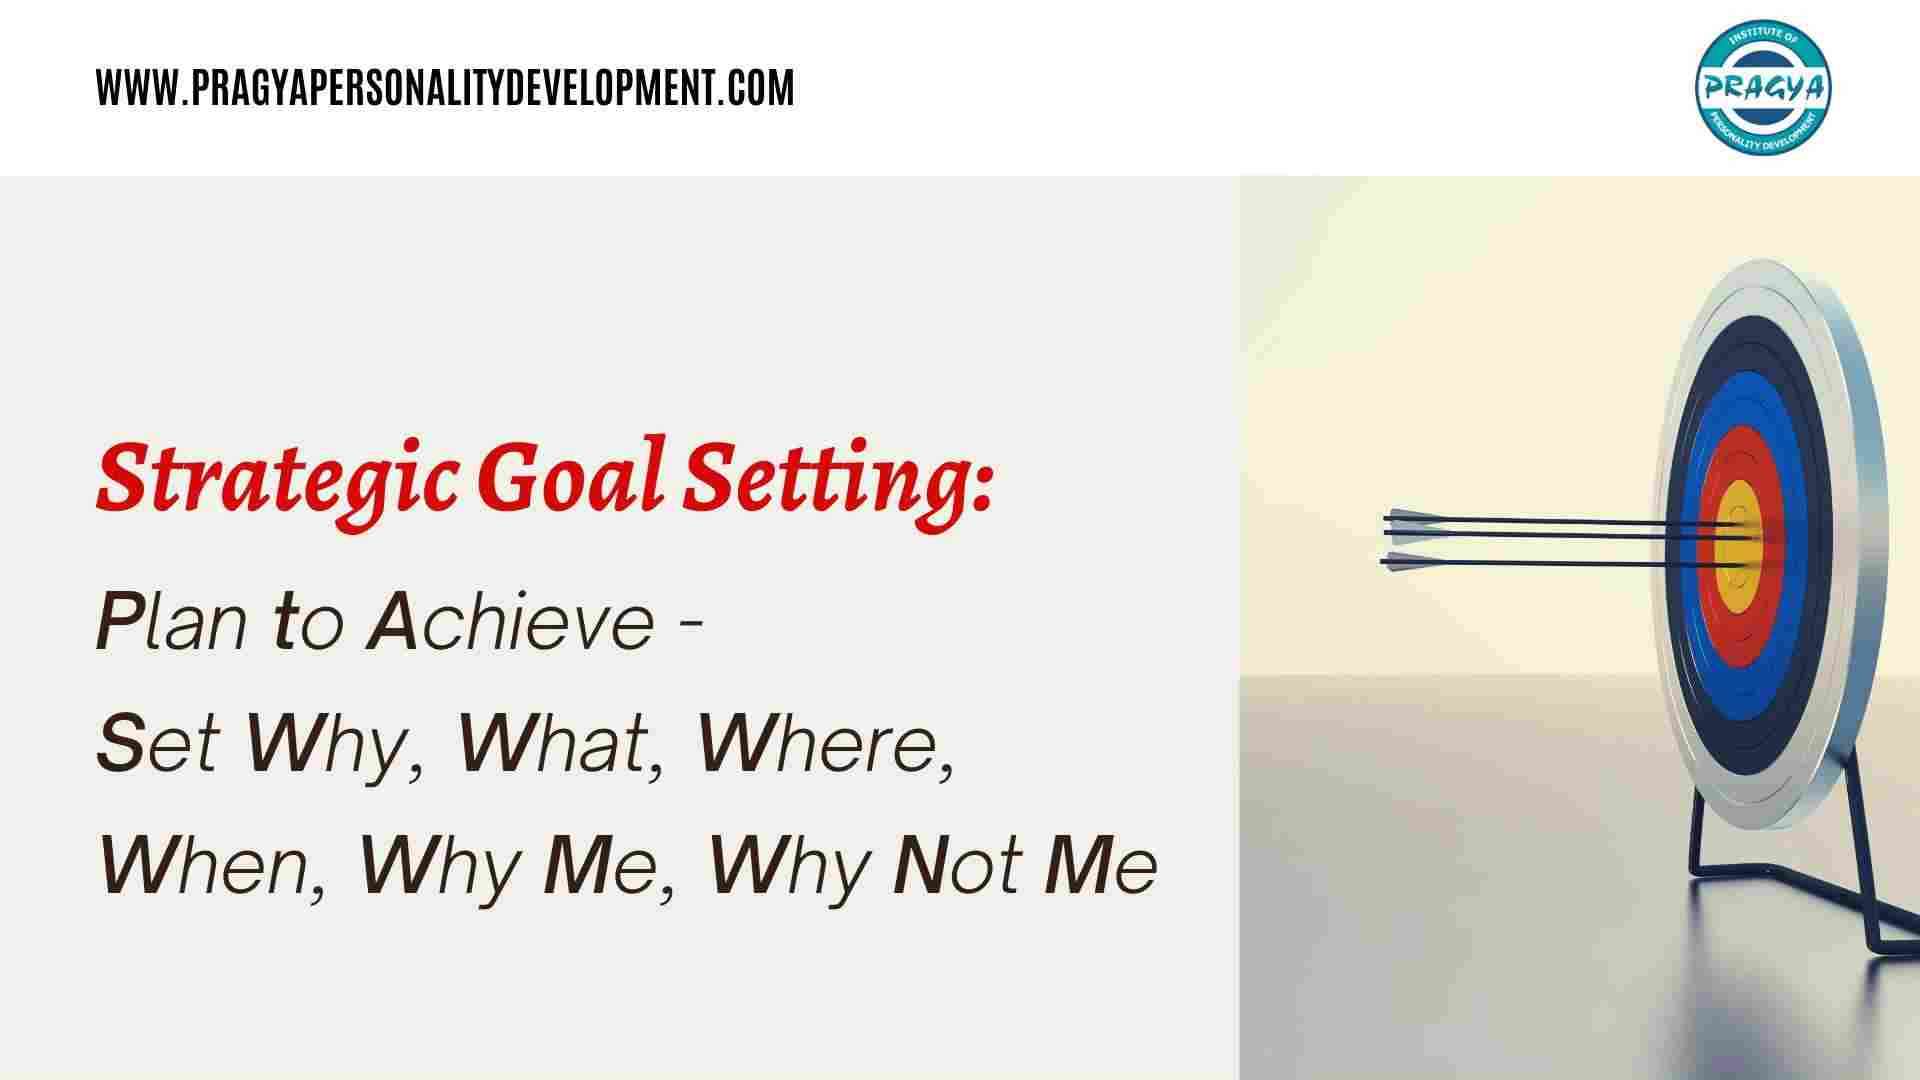 Strategic Goal Setting: Plan to Achieve - Set Why, What, Where, When, Why Me, Why Not Me